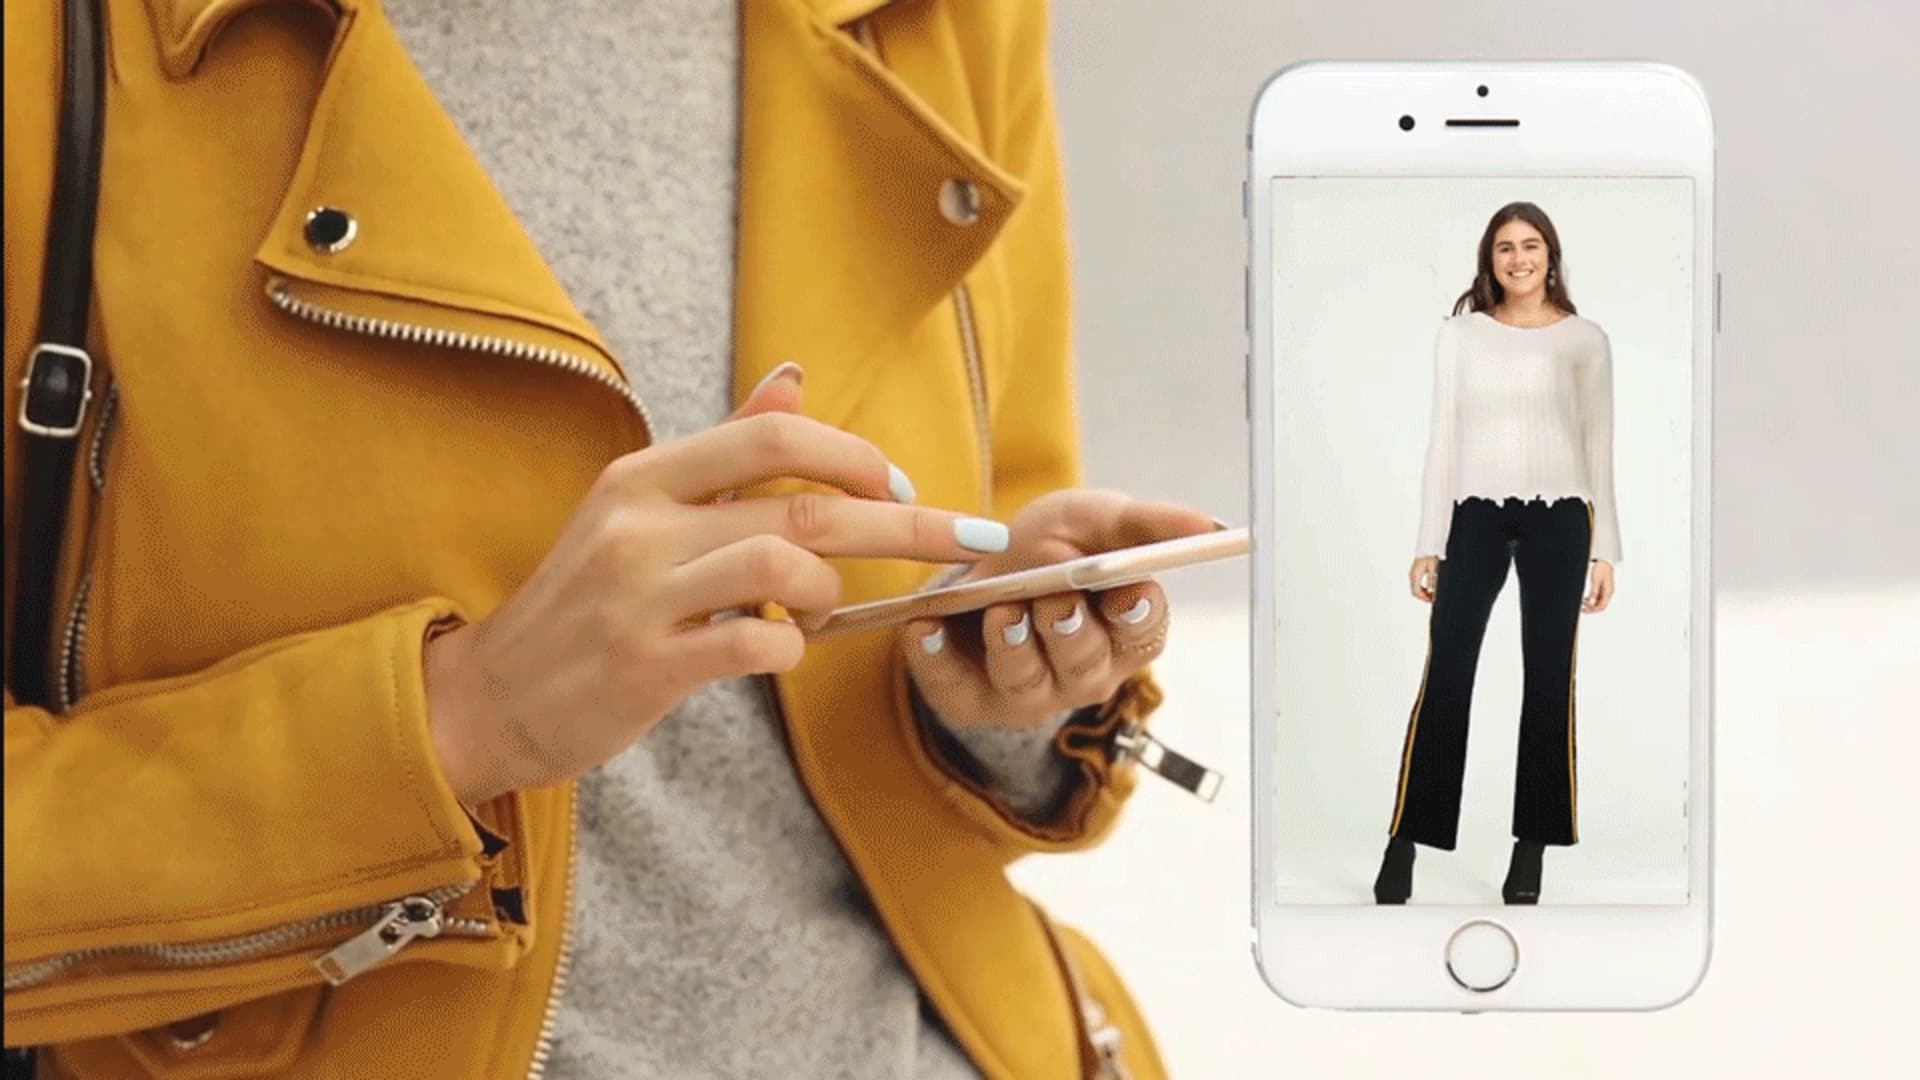 Walmart is acquiring Zeekit, a virtual fitting room start-up, which has technology that allows shoppers to upload a photo, digitally try on a clothing item and get a friend's opinion.